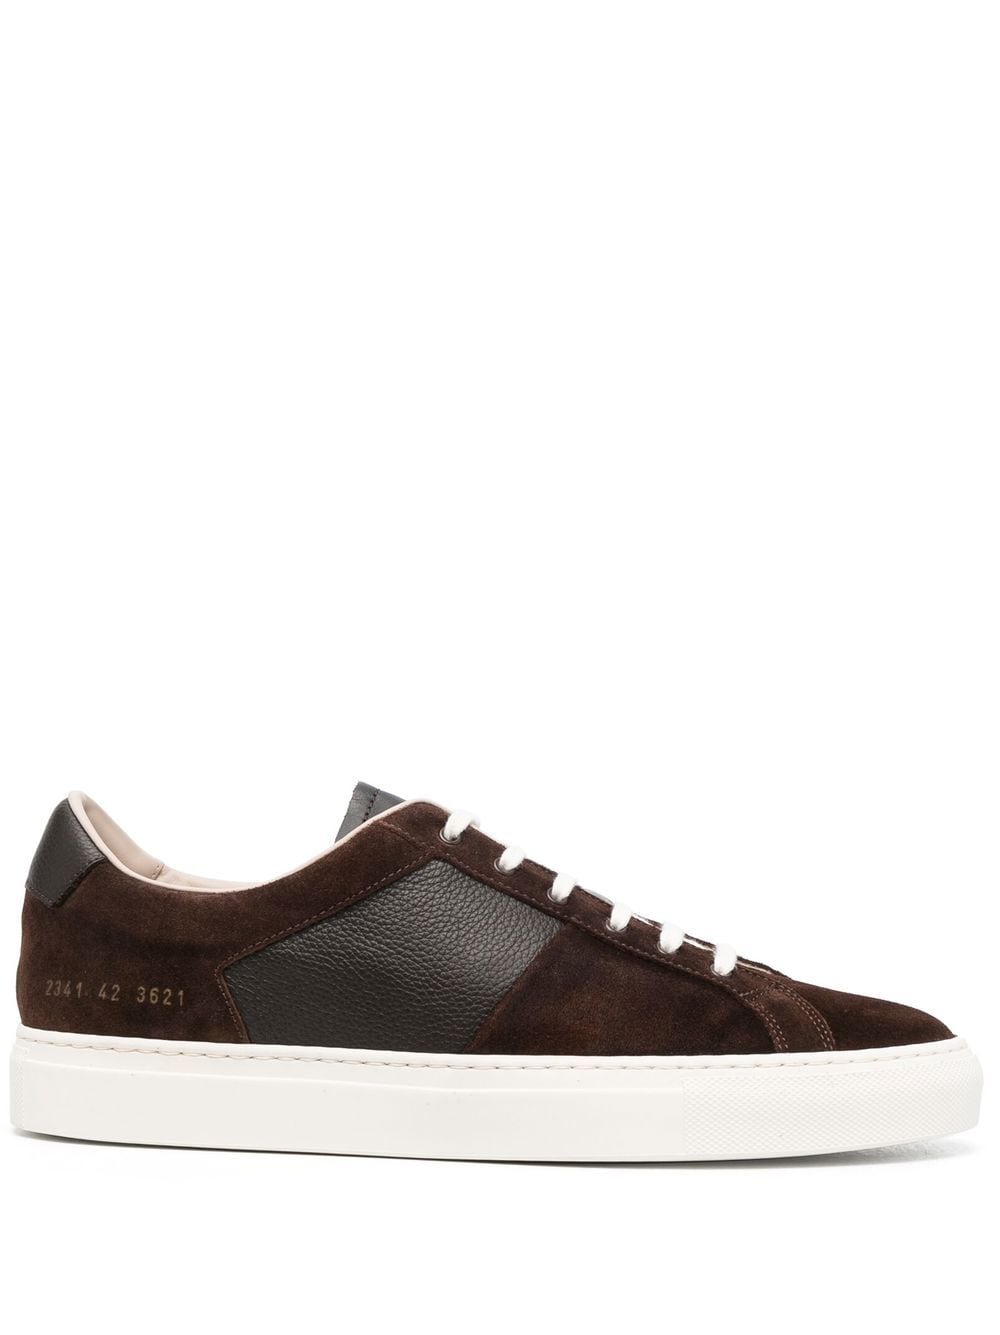 Common Projects Achilles Sneakers - Braun von Common Projects